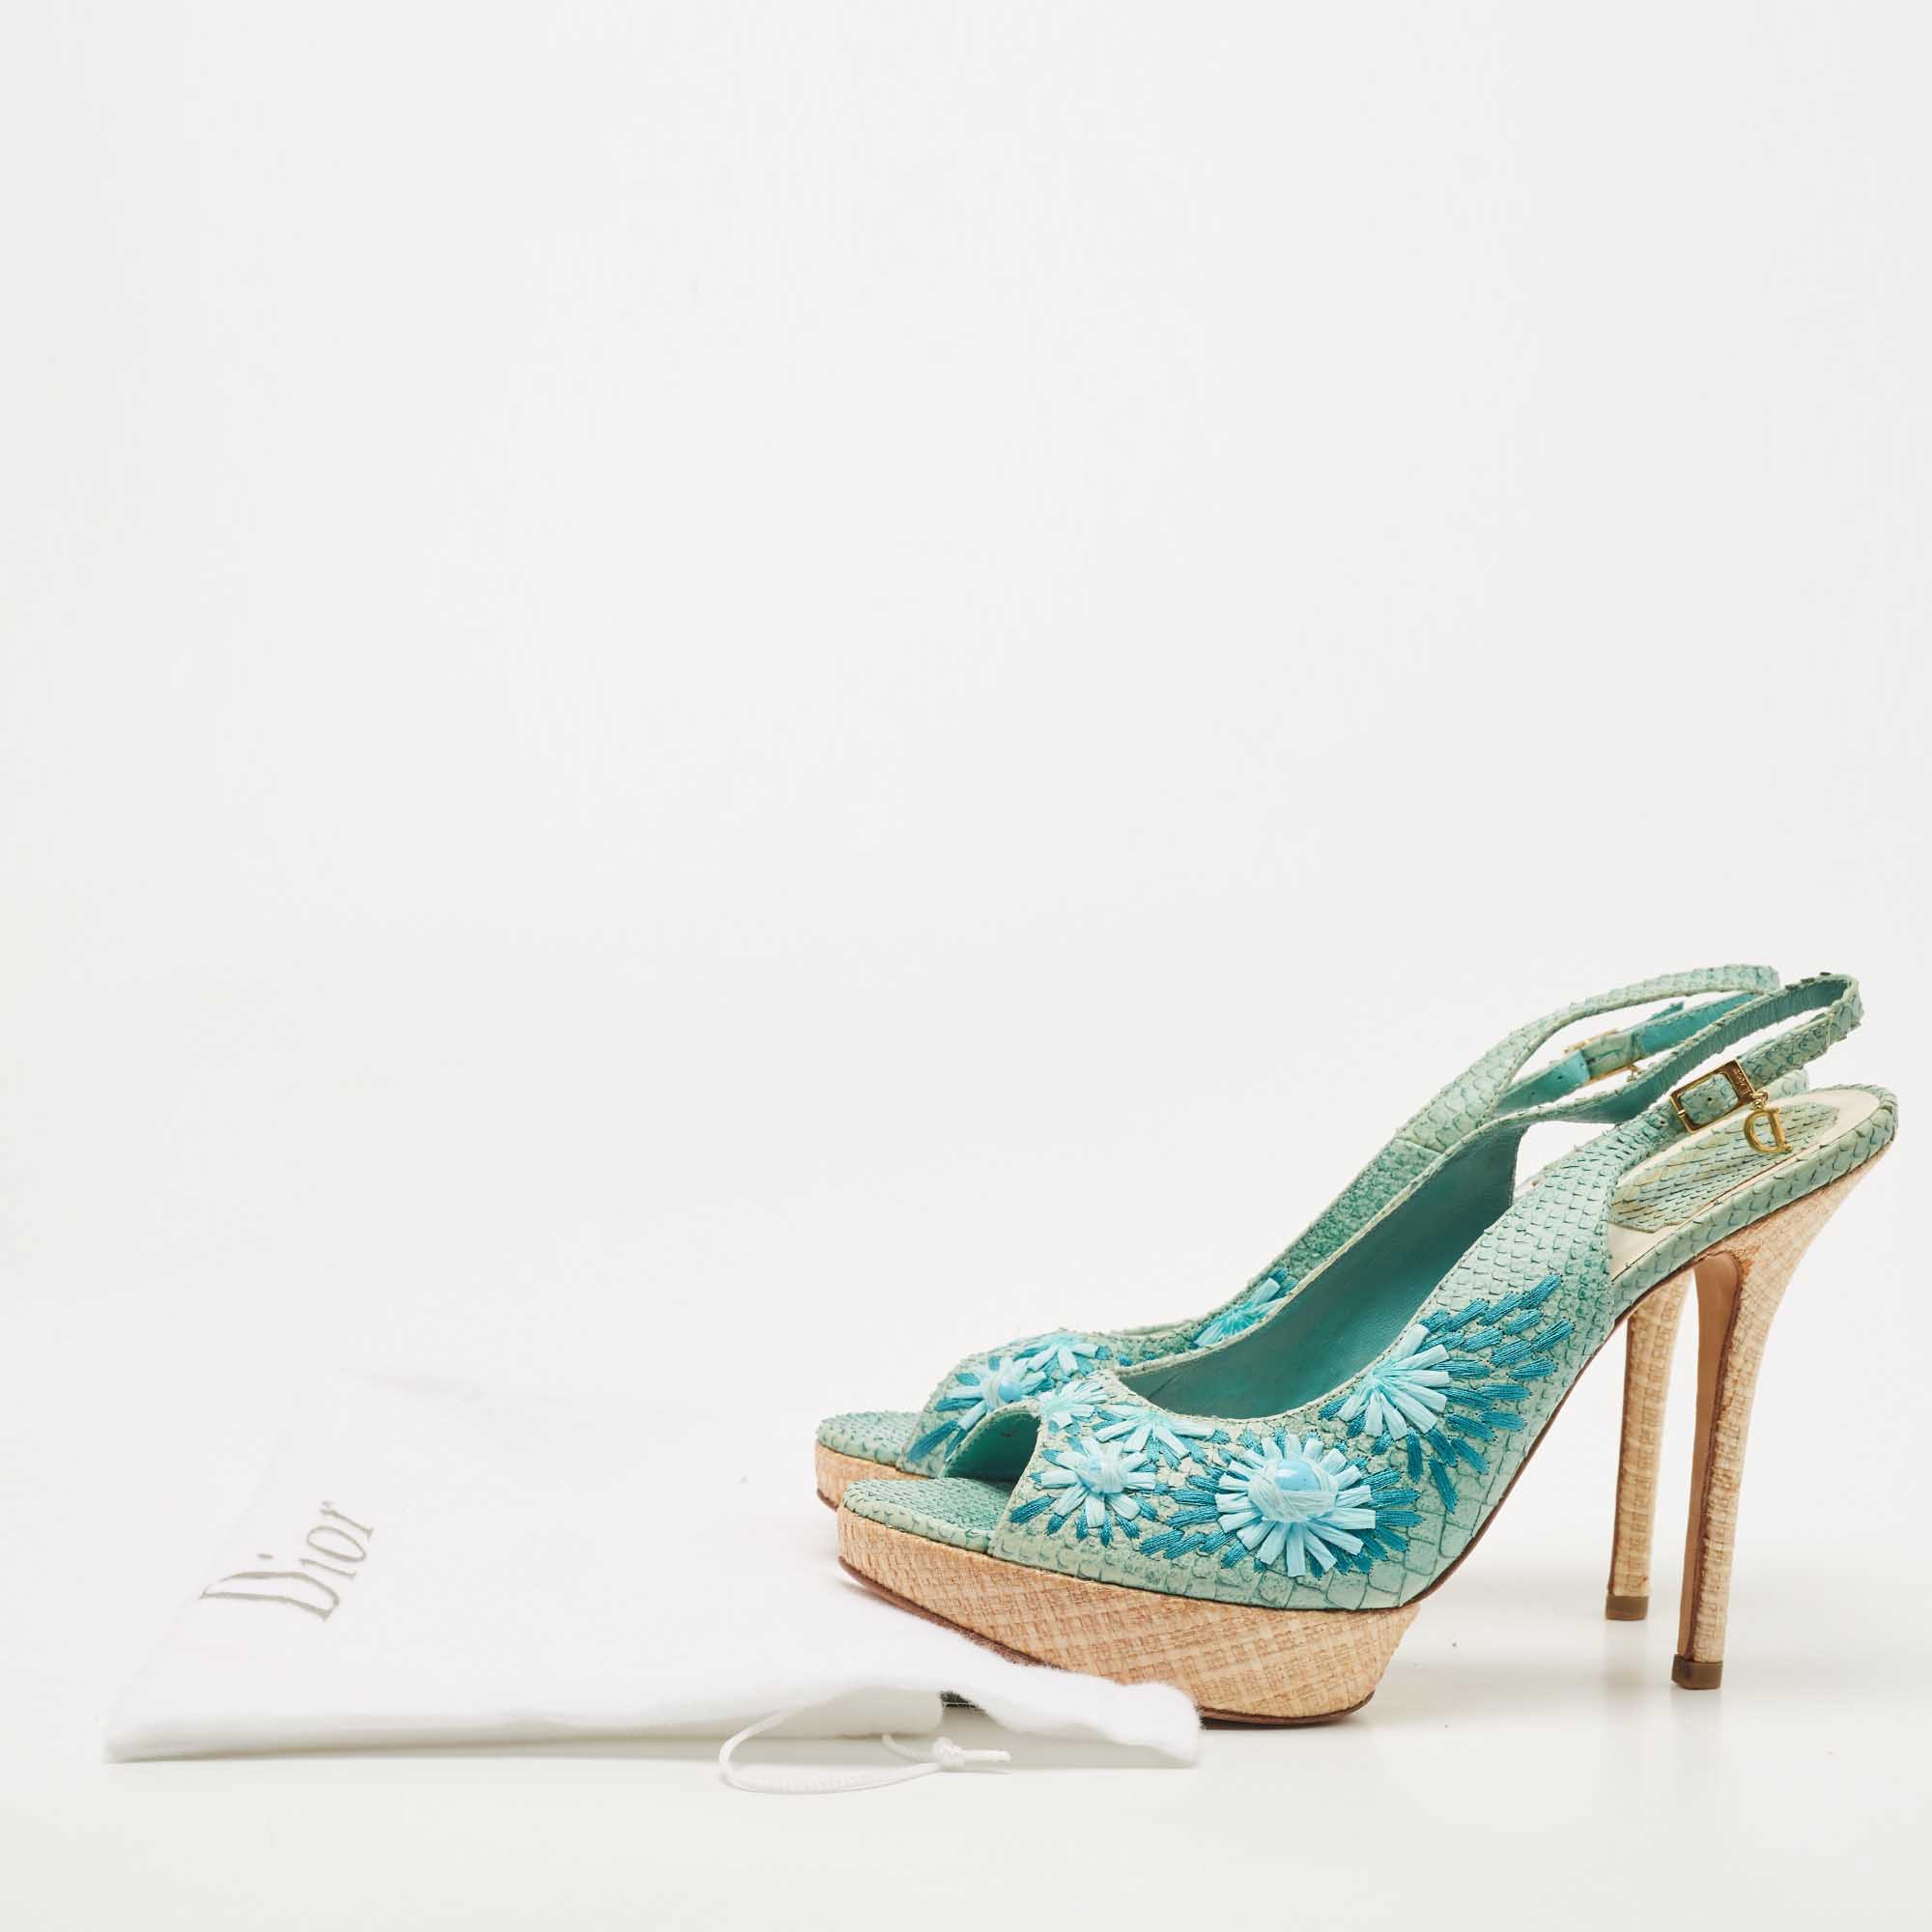 Dior Blue Snakeskin Leather And  Floral Straw Logo Charm Slingback Peep Toe Sandals Size 40.5